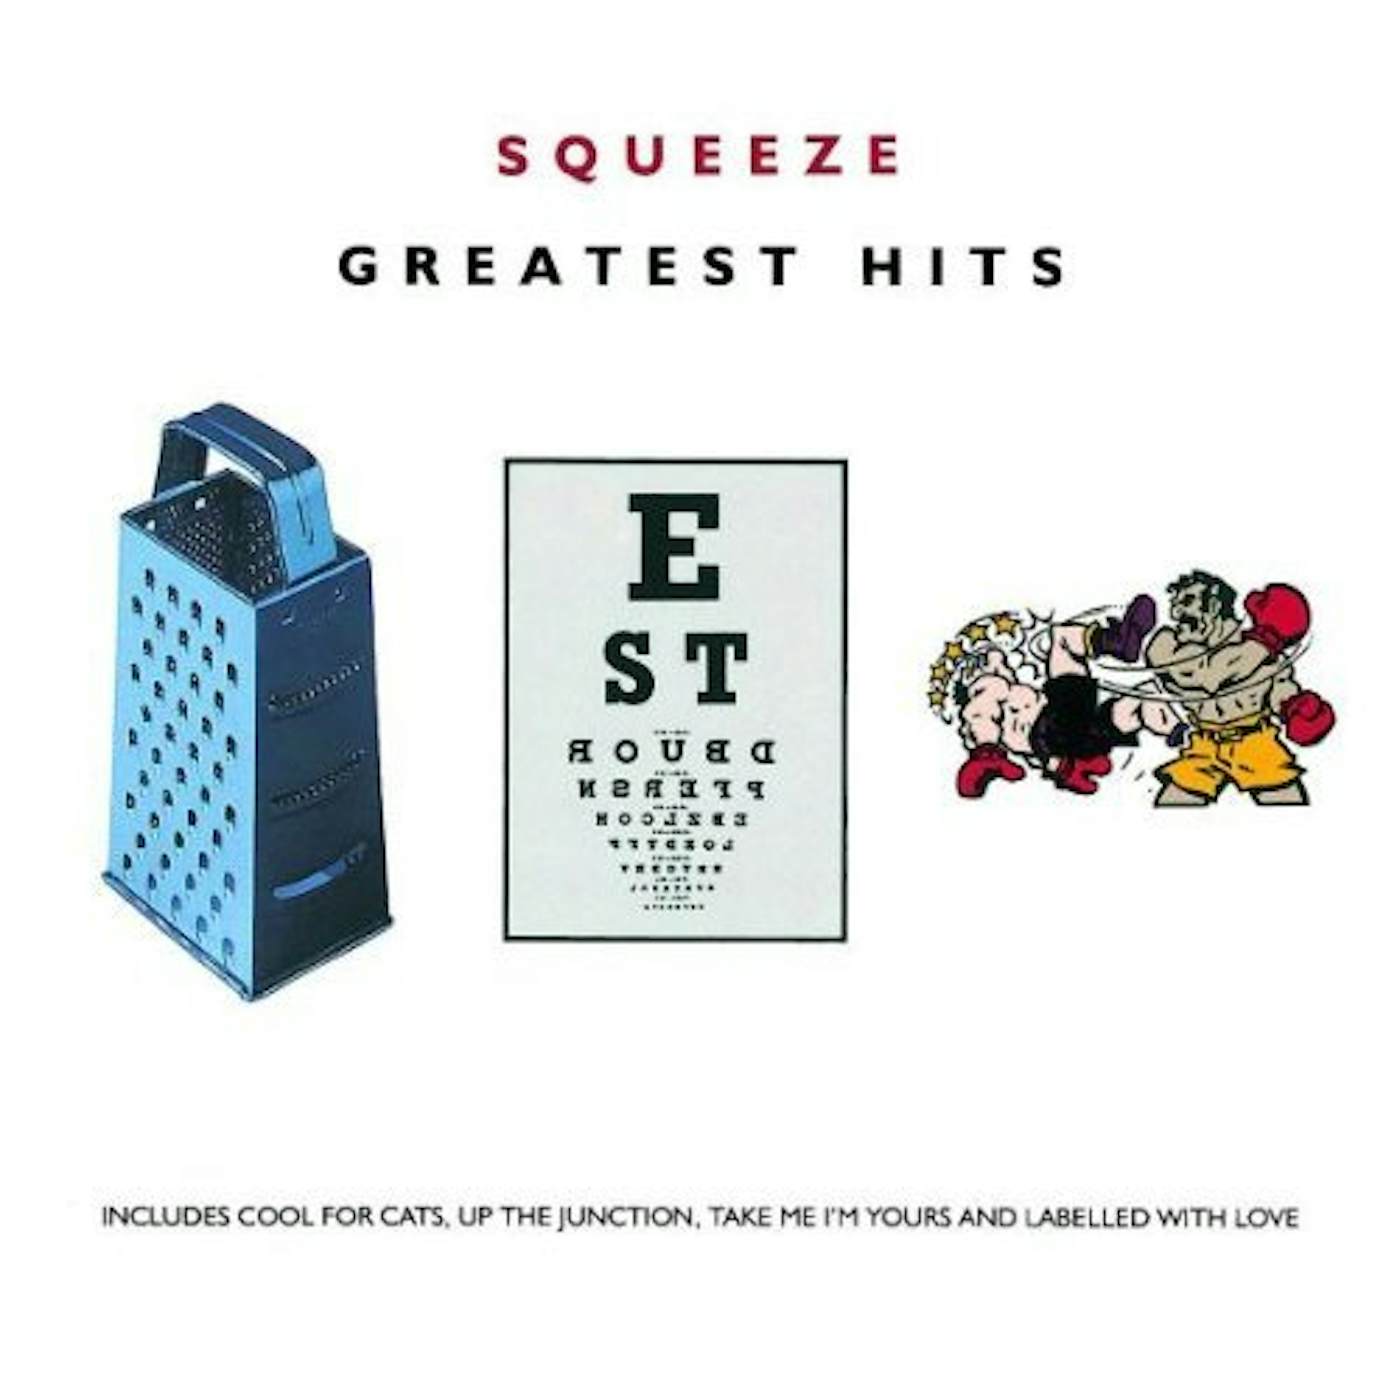 Squeeze GREATEST HITS CD